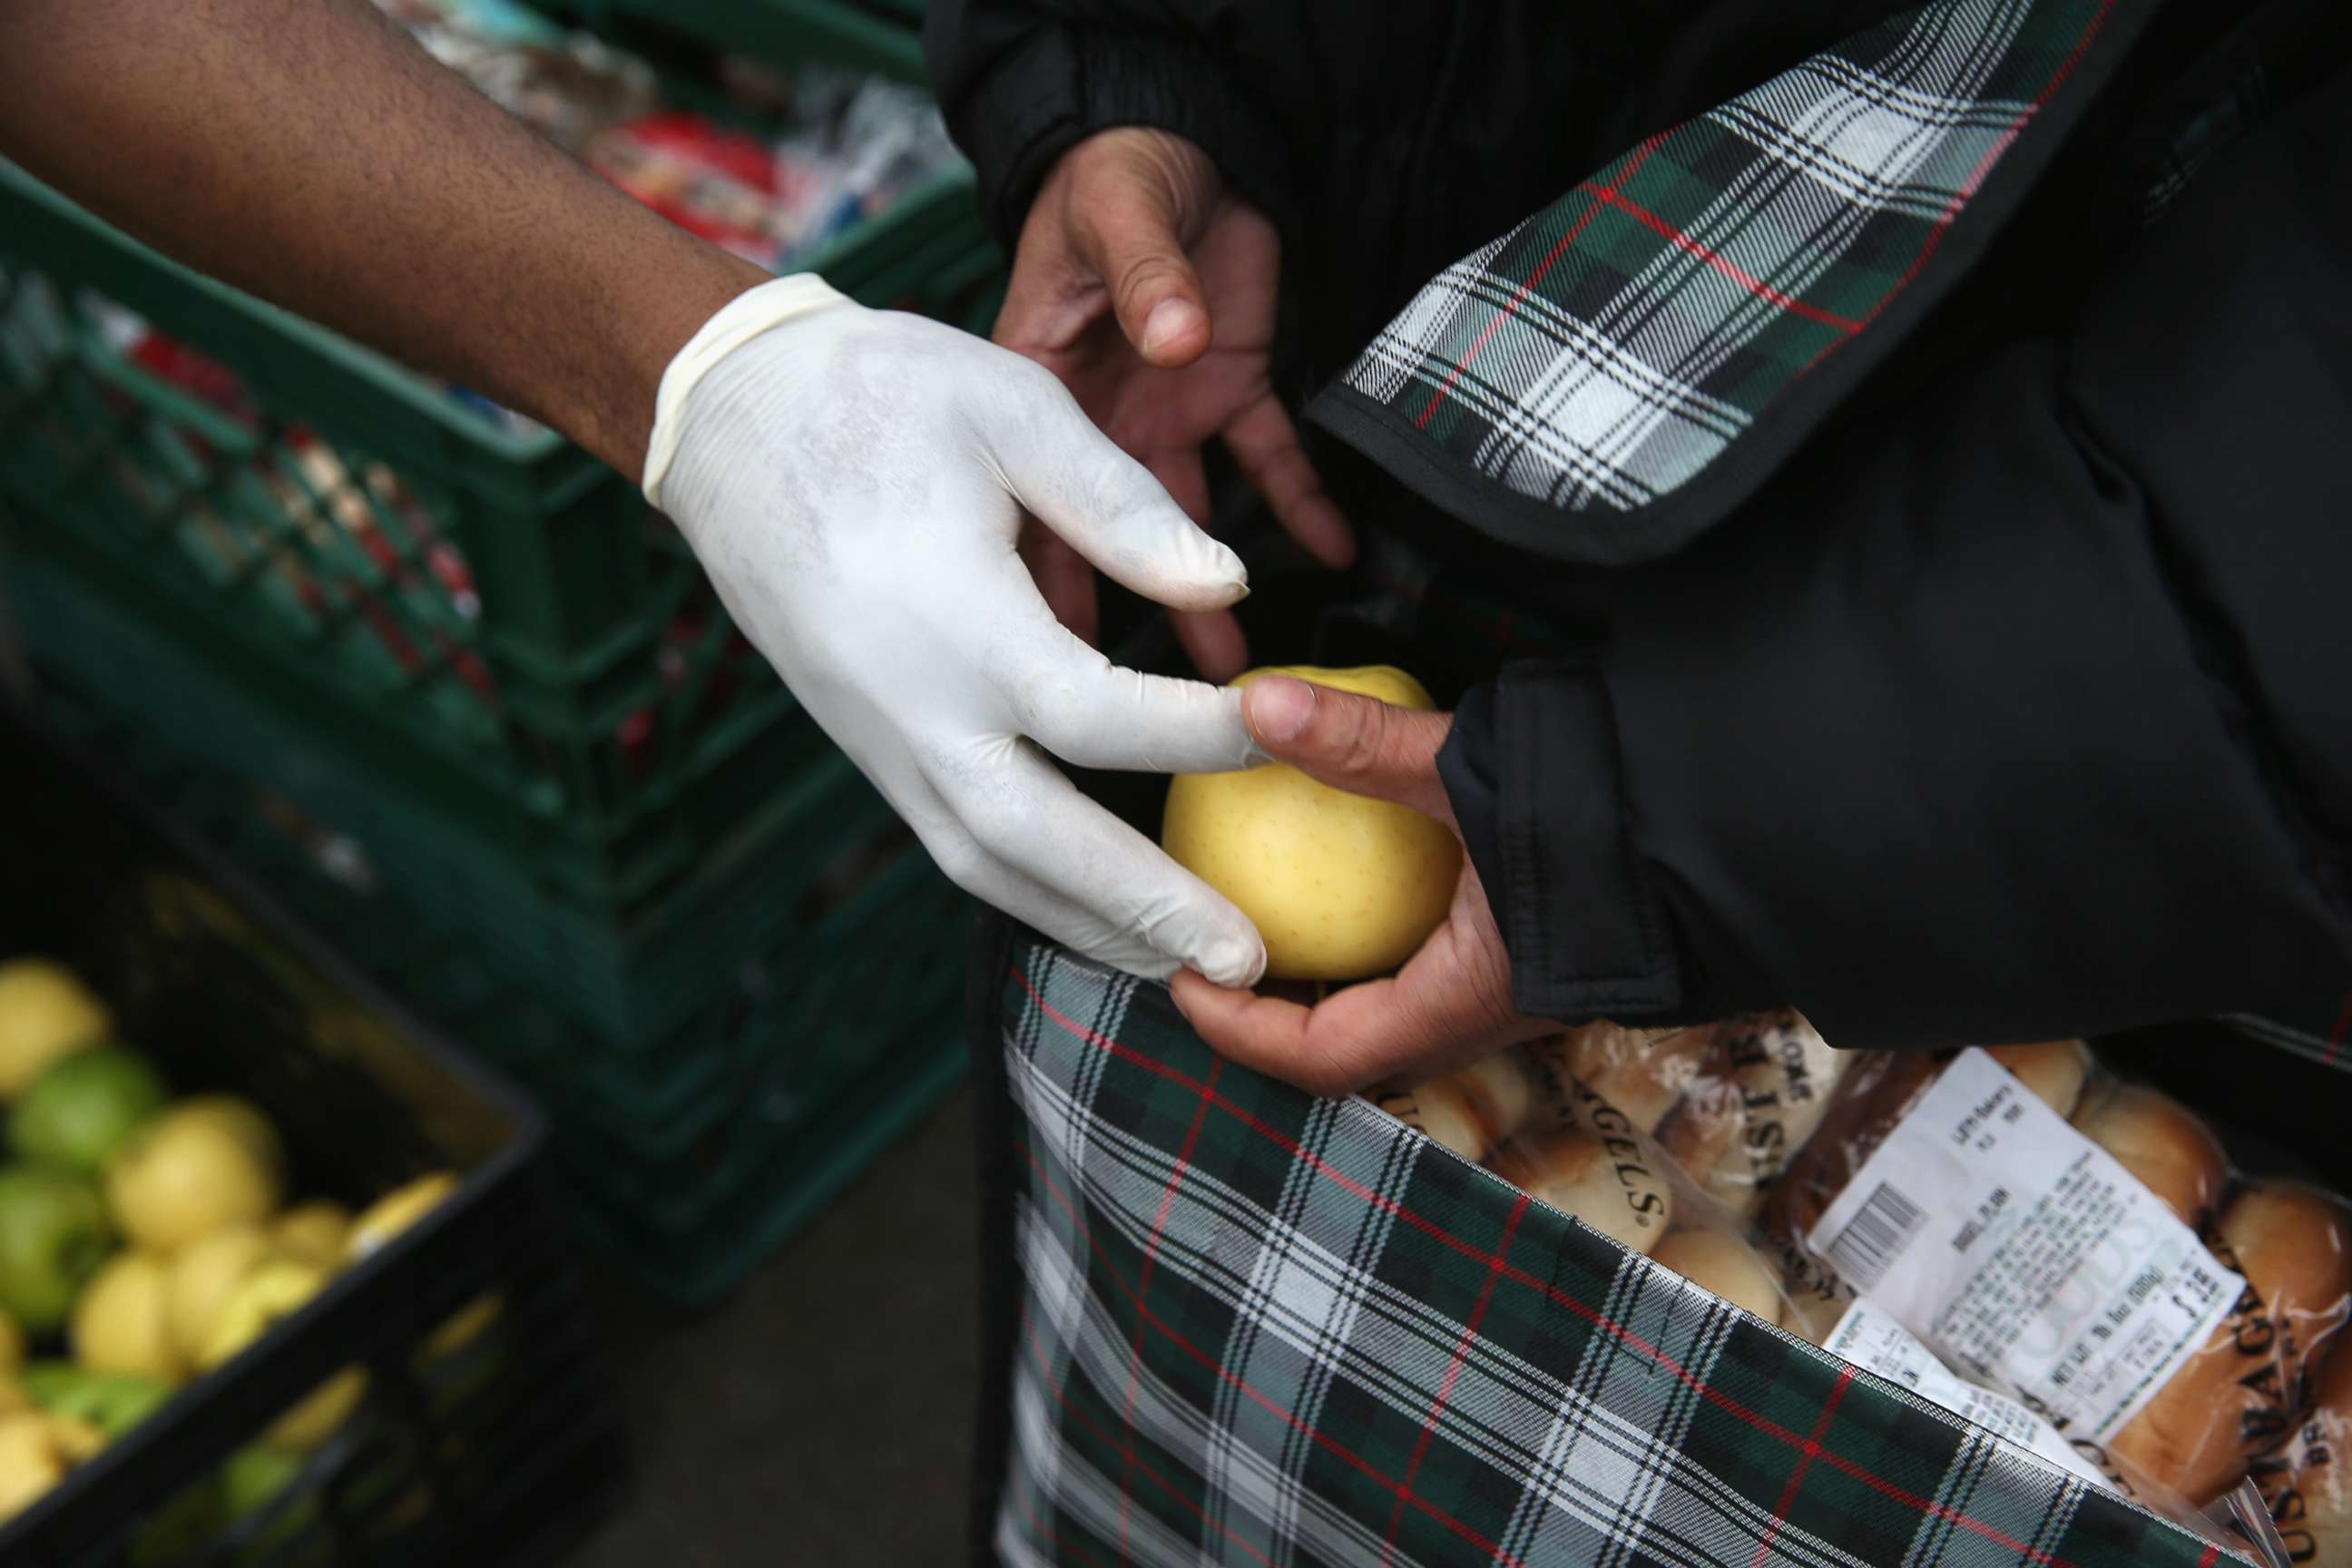 PHOTO: Brooklyn residents receive free food as part of a Bowery Mission outreach program on Dec. 5, 2013 in New York City.